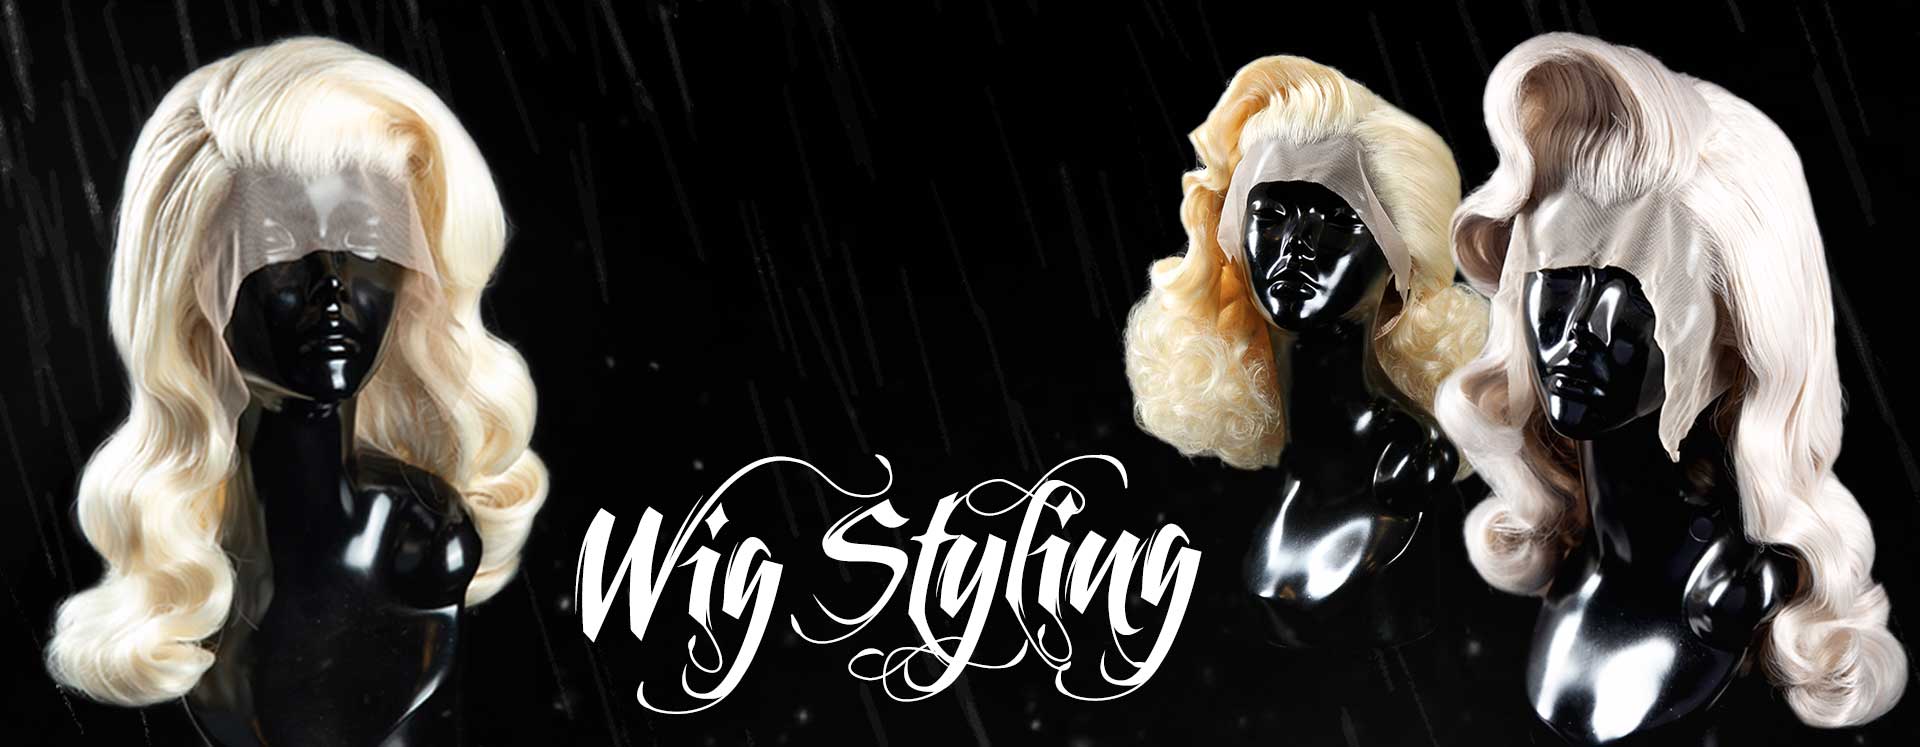 Deluxe Styled Wigs